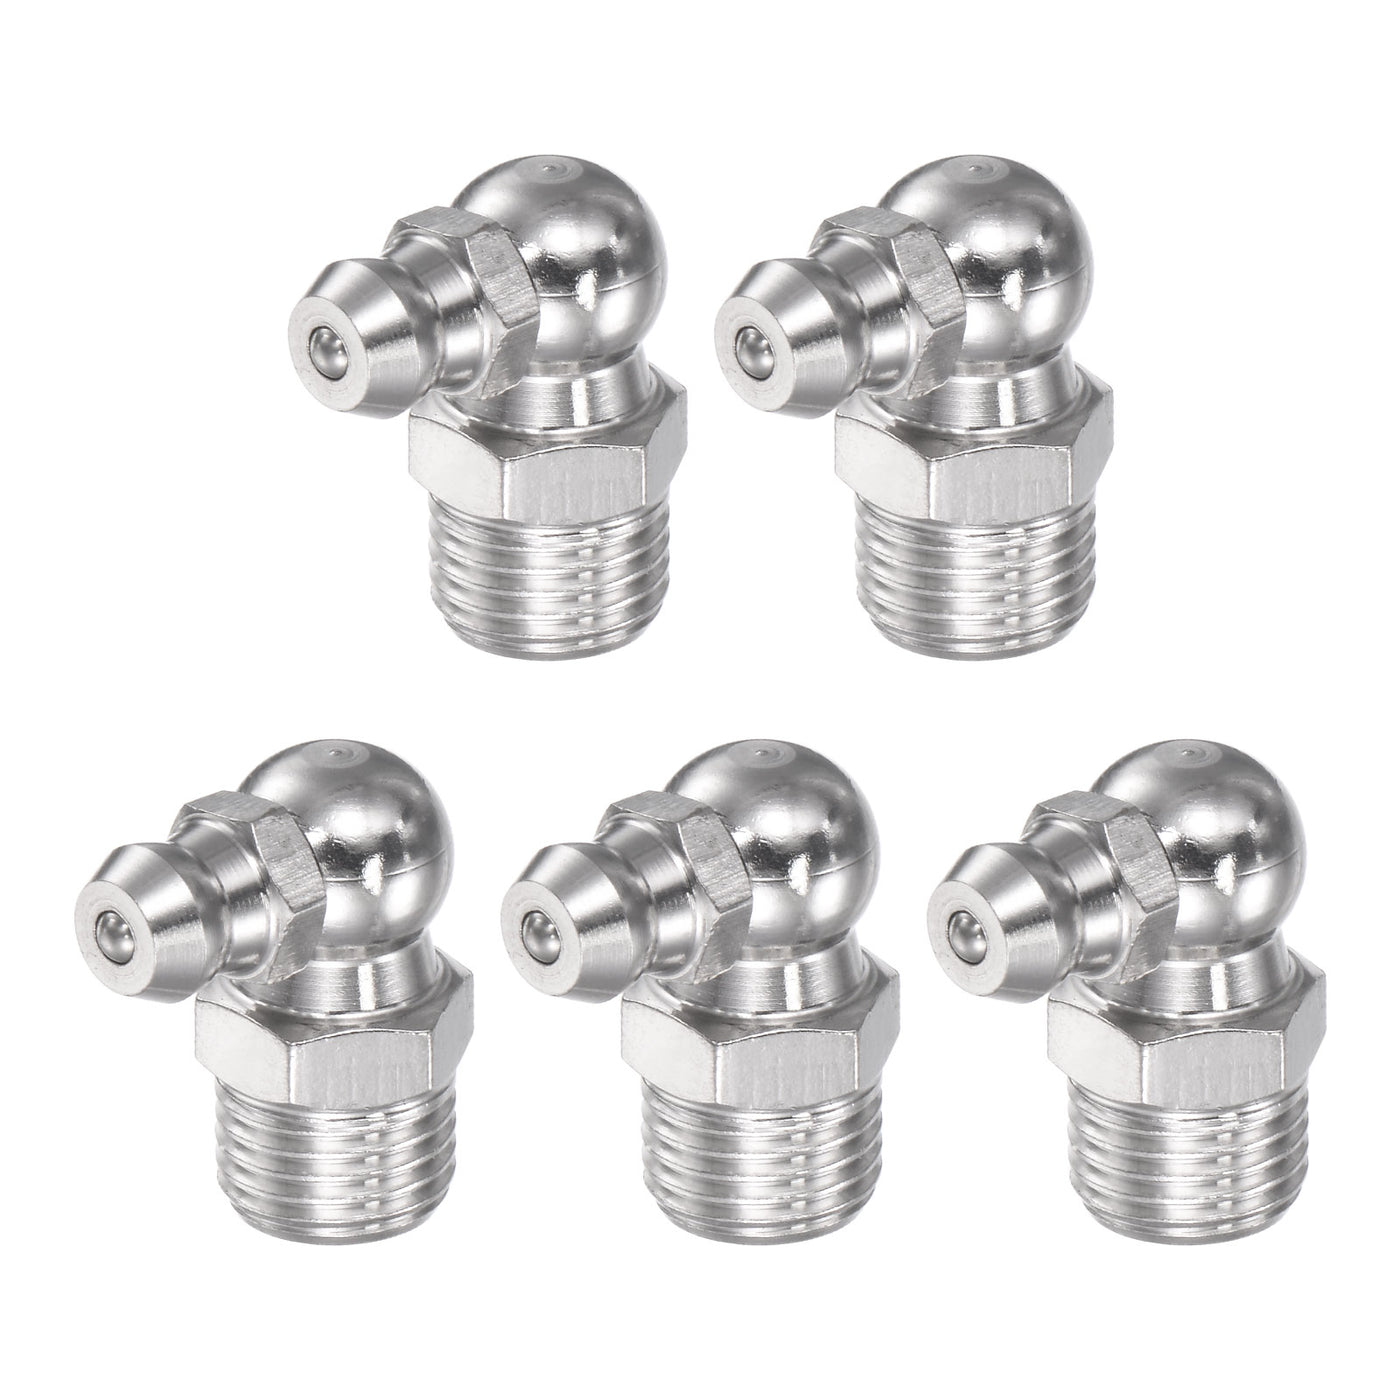 Uxcell Uxcell 201 Stainless Steel 90 Degree Hydraulic Grease Fitting M10 x 1mm Thread, 5Pcs